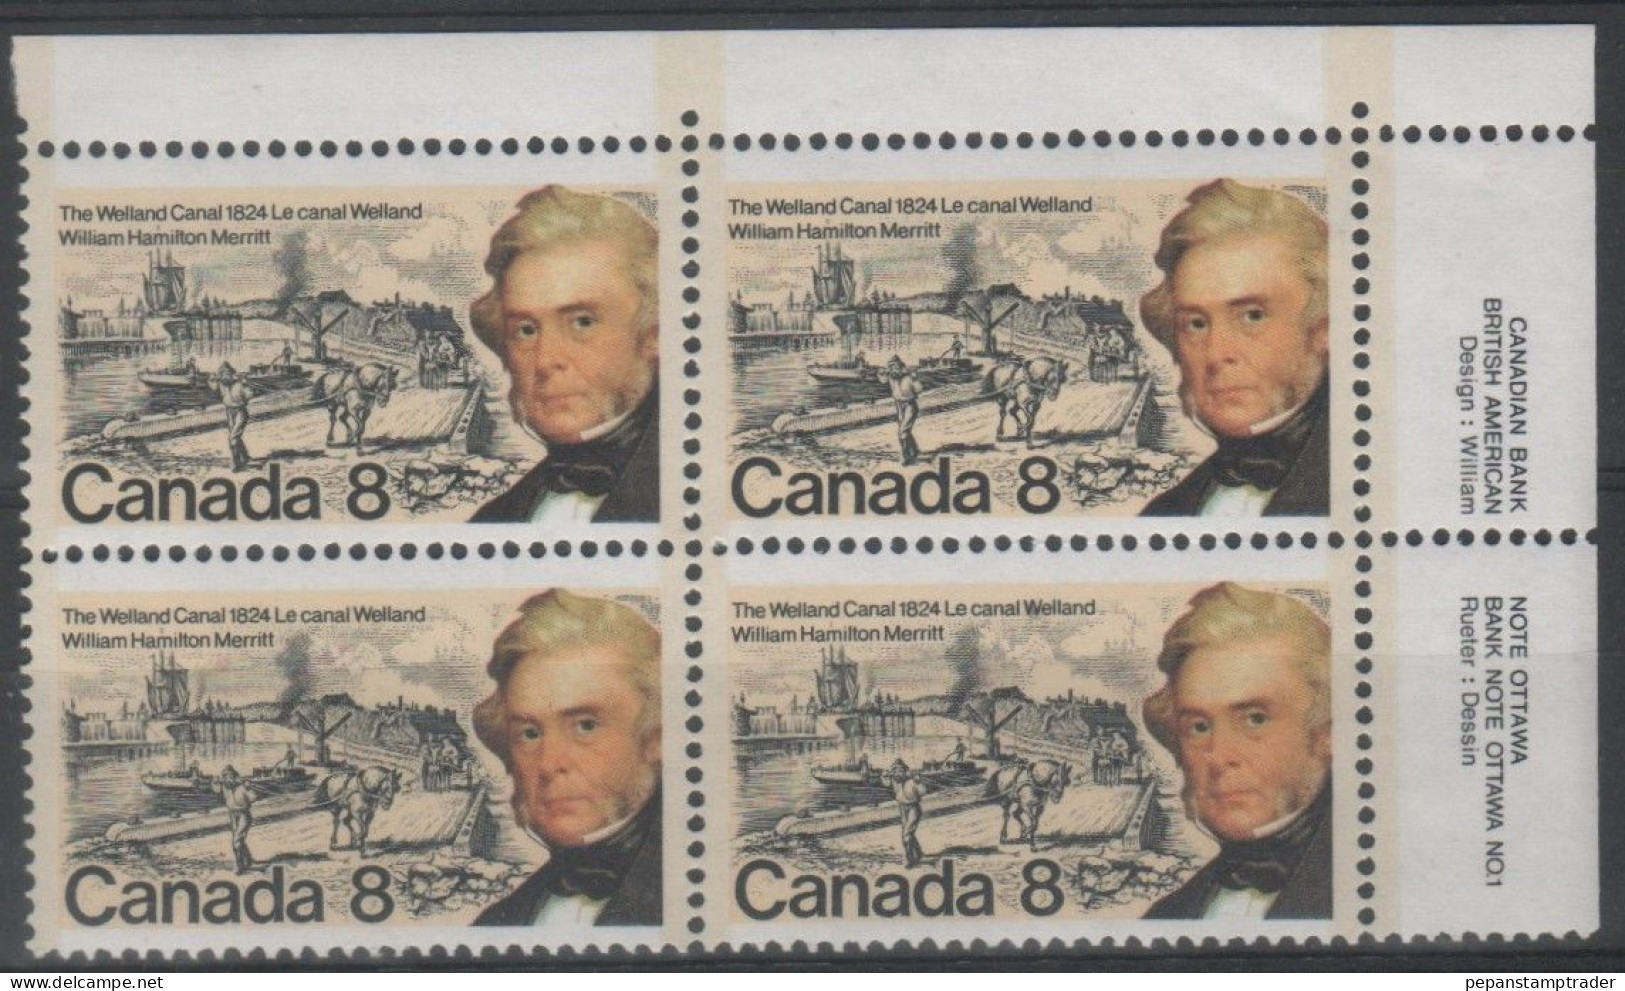 Canada - #655 - MNH PB - Plate Number & Inscriptions